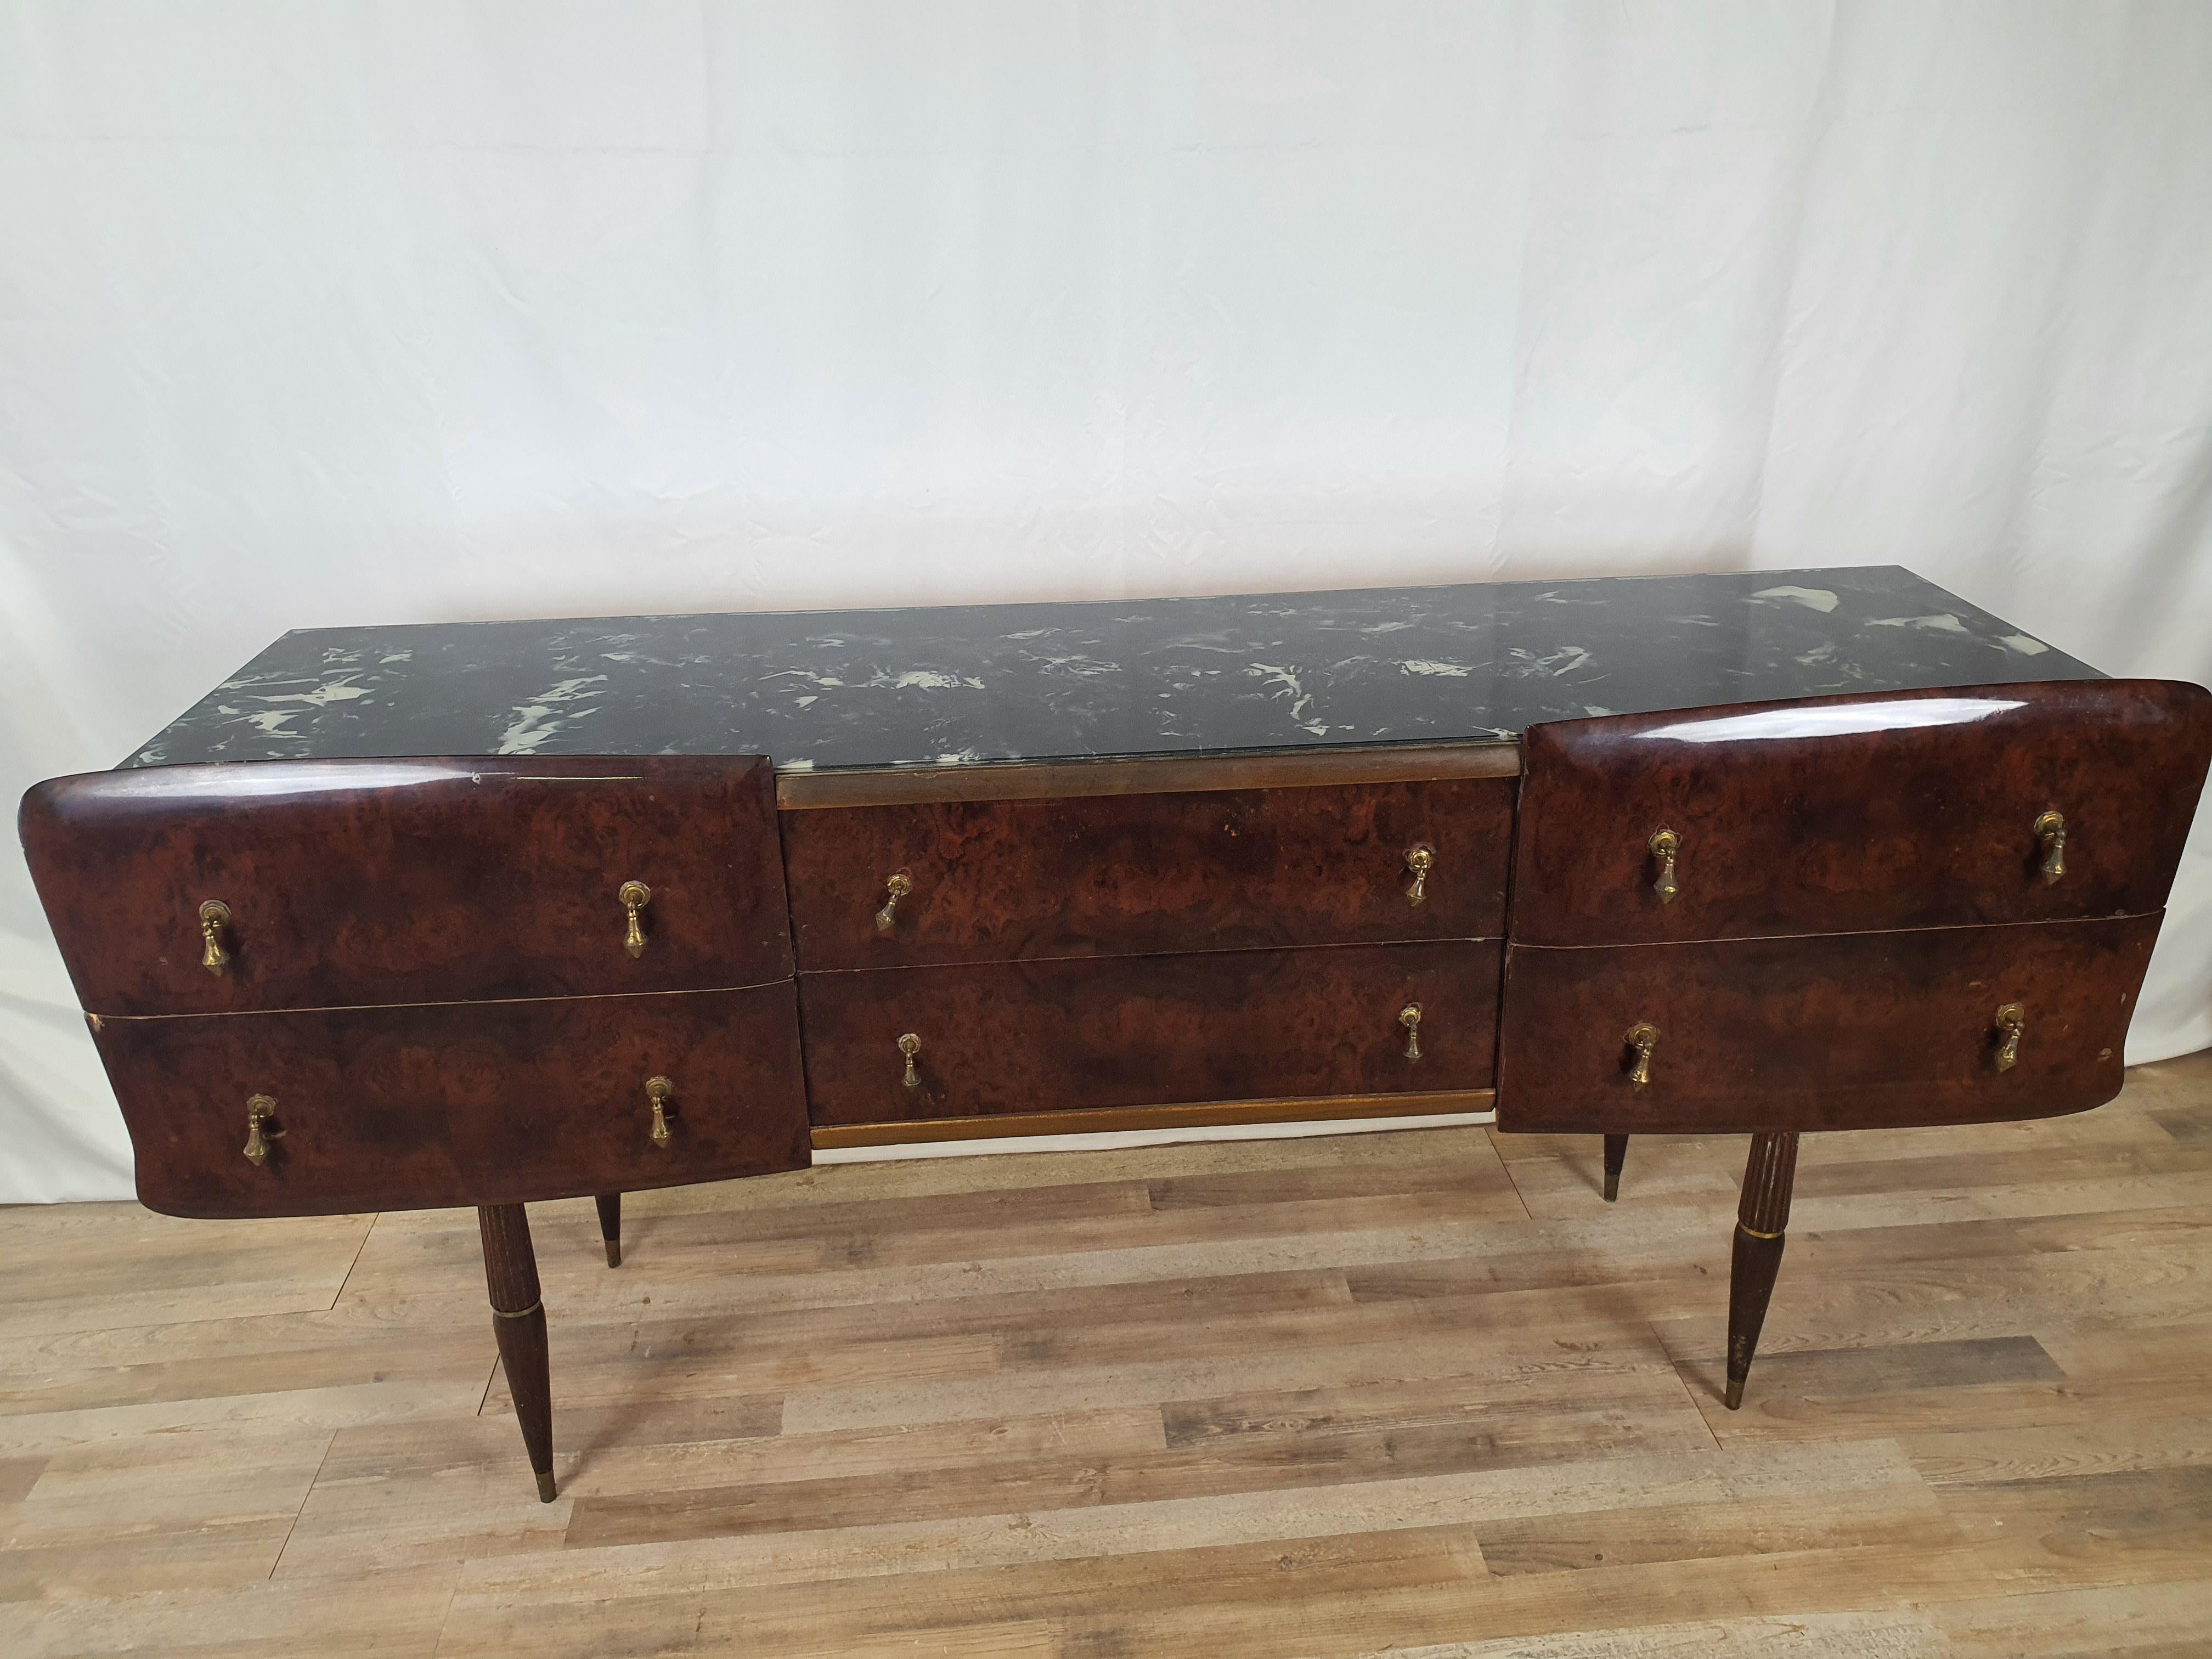 Vintage Italian-style chest of drawers with a particular glass top worked and decorated with a marbled effect.

Very elegant, it lends itself to any kind of modern or ancient environment.

Six large drawers with original brass handles.

Normal